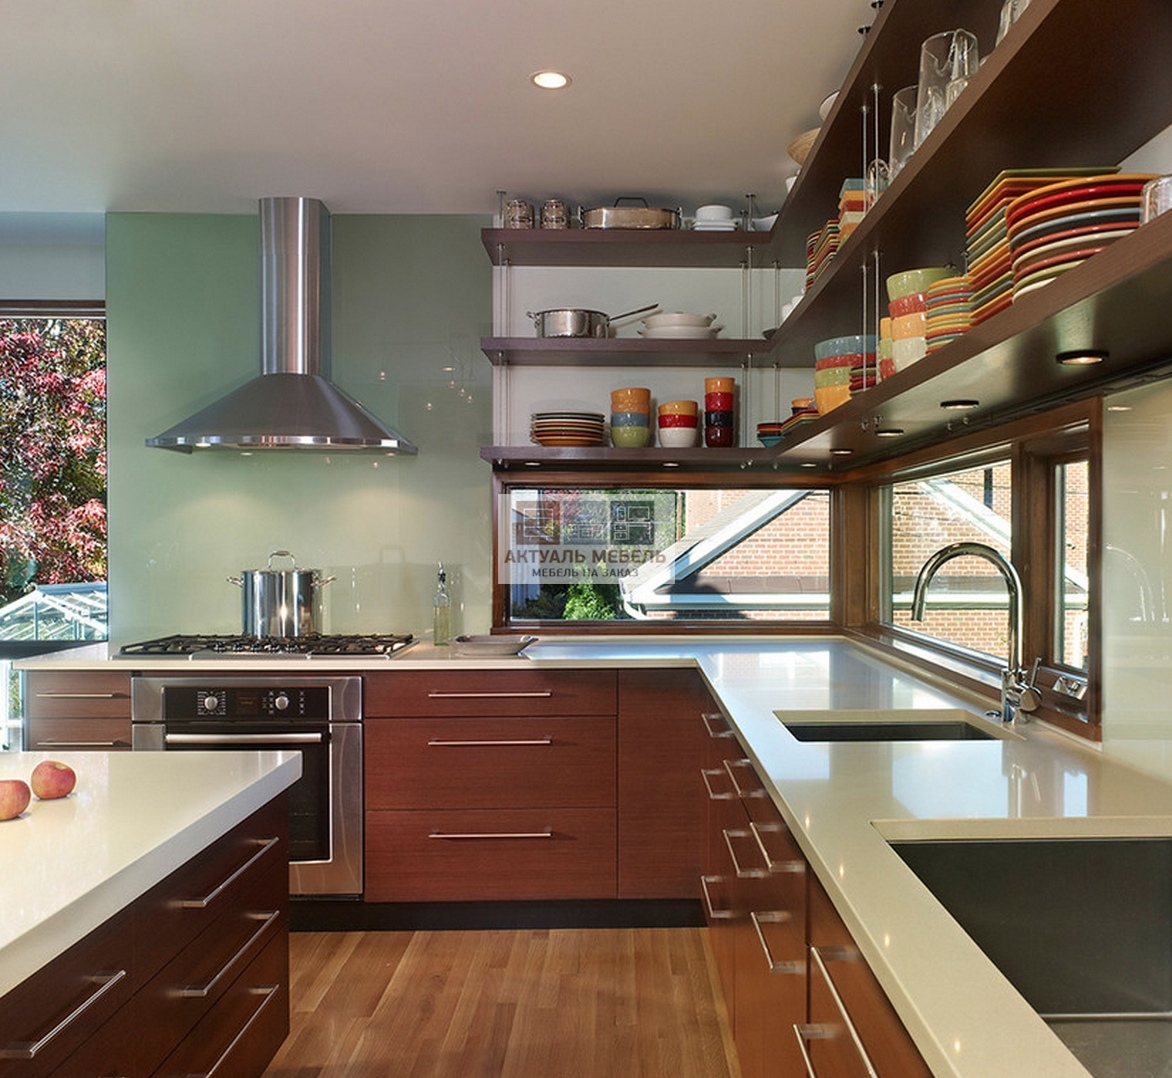 https://foter.com/photos/424/kitchen-with-open-shelving-and-colorful-crockery.jpg